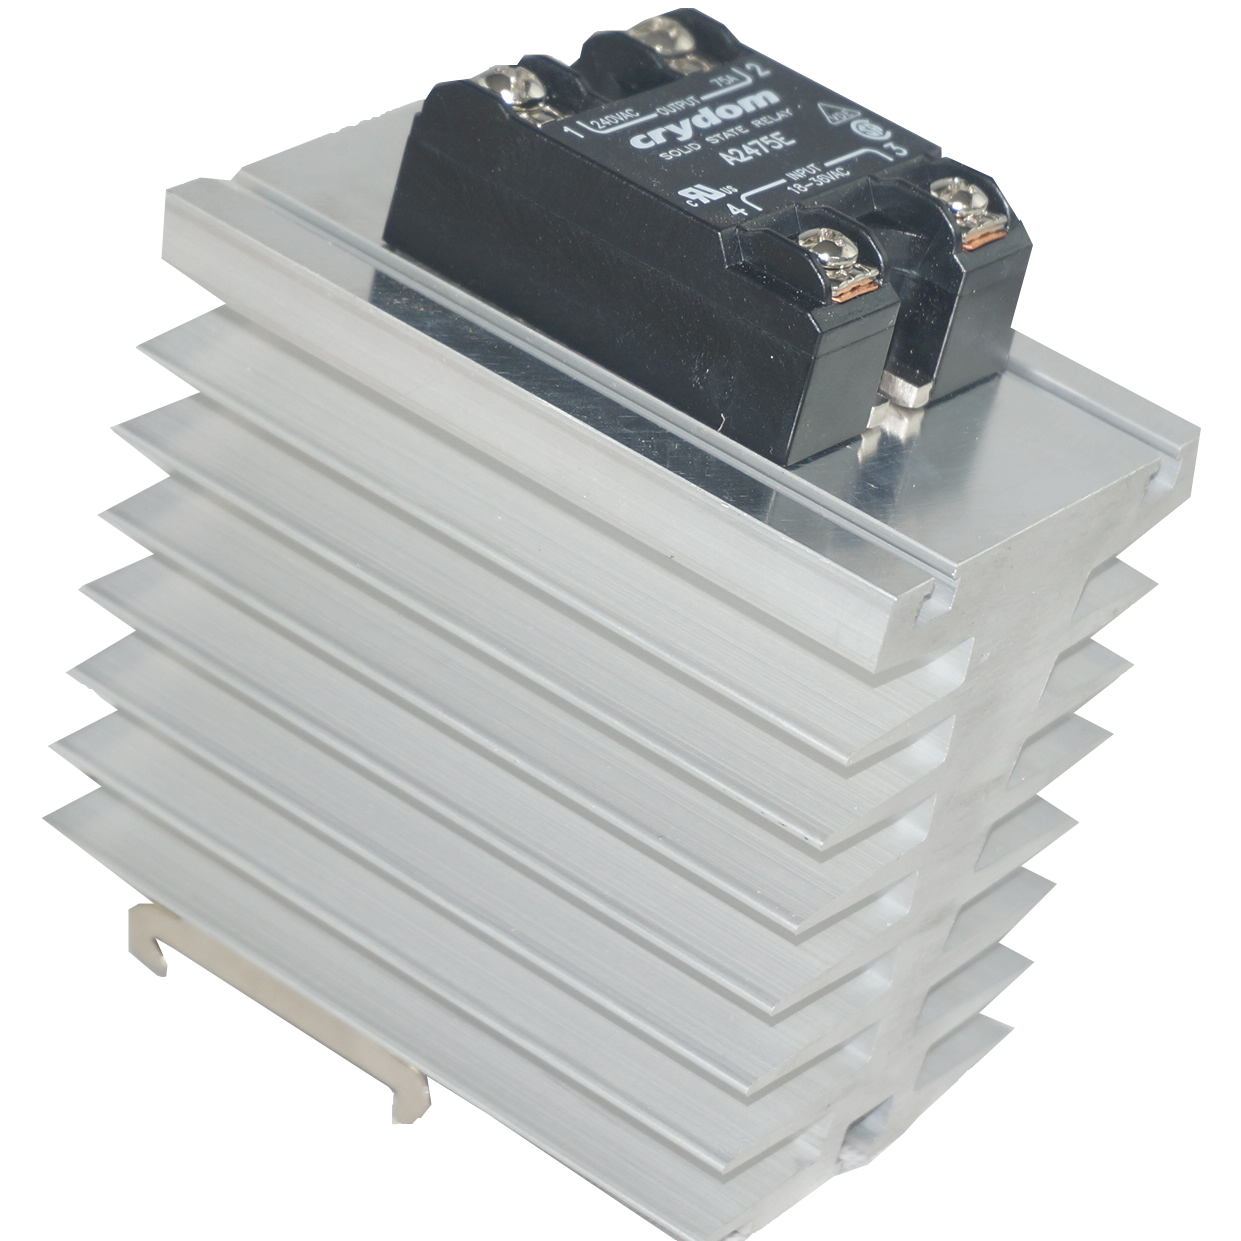 GFIN/150M-DR + D2490, Din Rail Mount Solid State Relay with Heatsink, 4-32VDC Control Input, 24-280VAC Output, 71 Amps @ 40 Deg C ambient